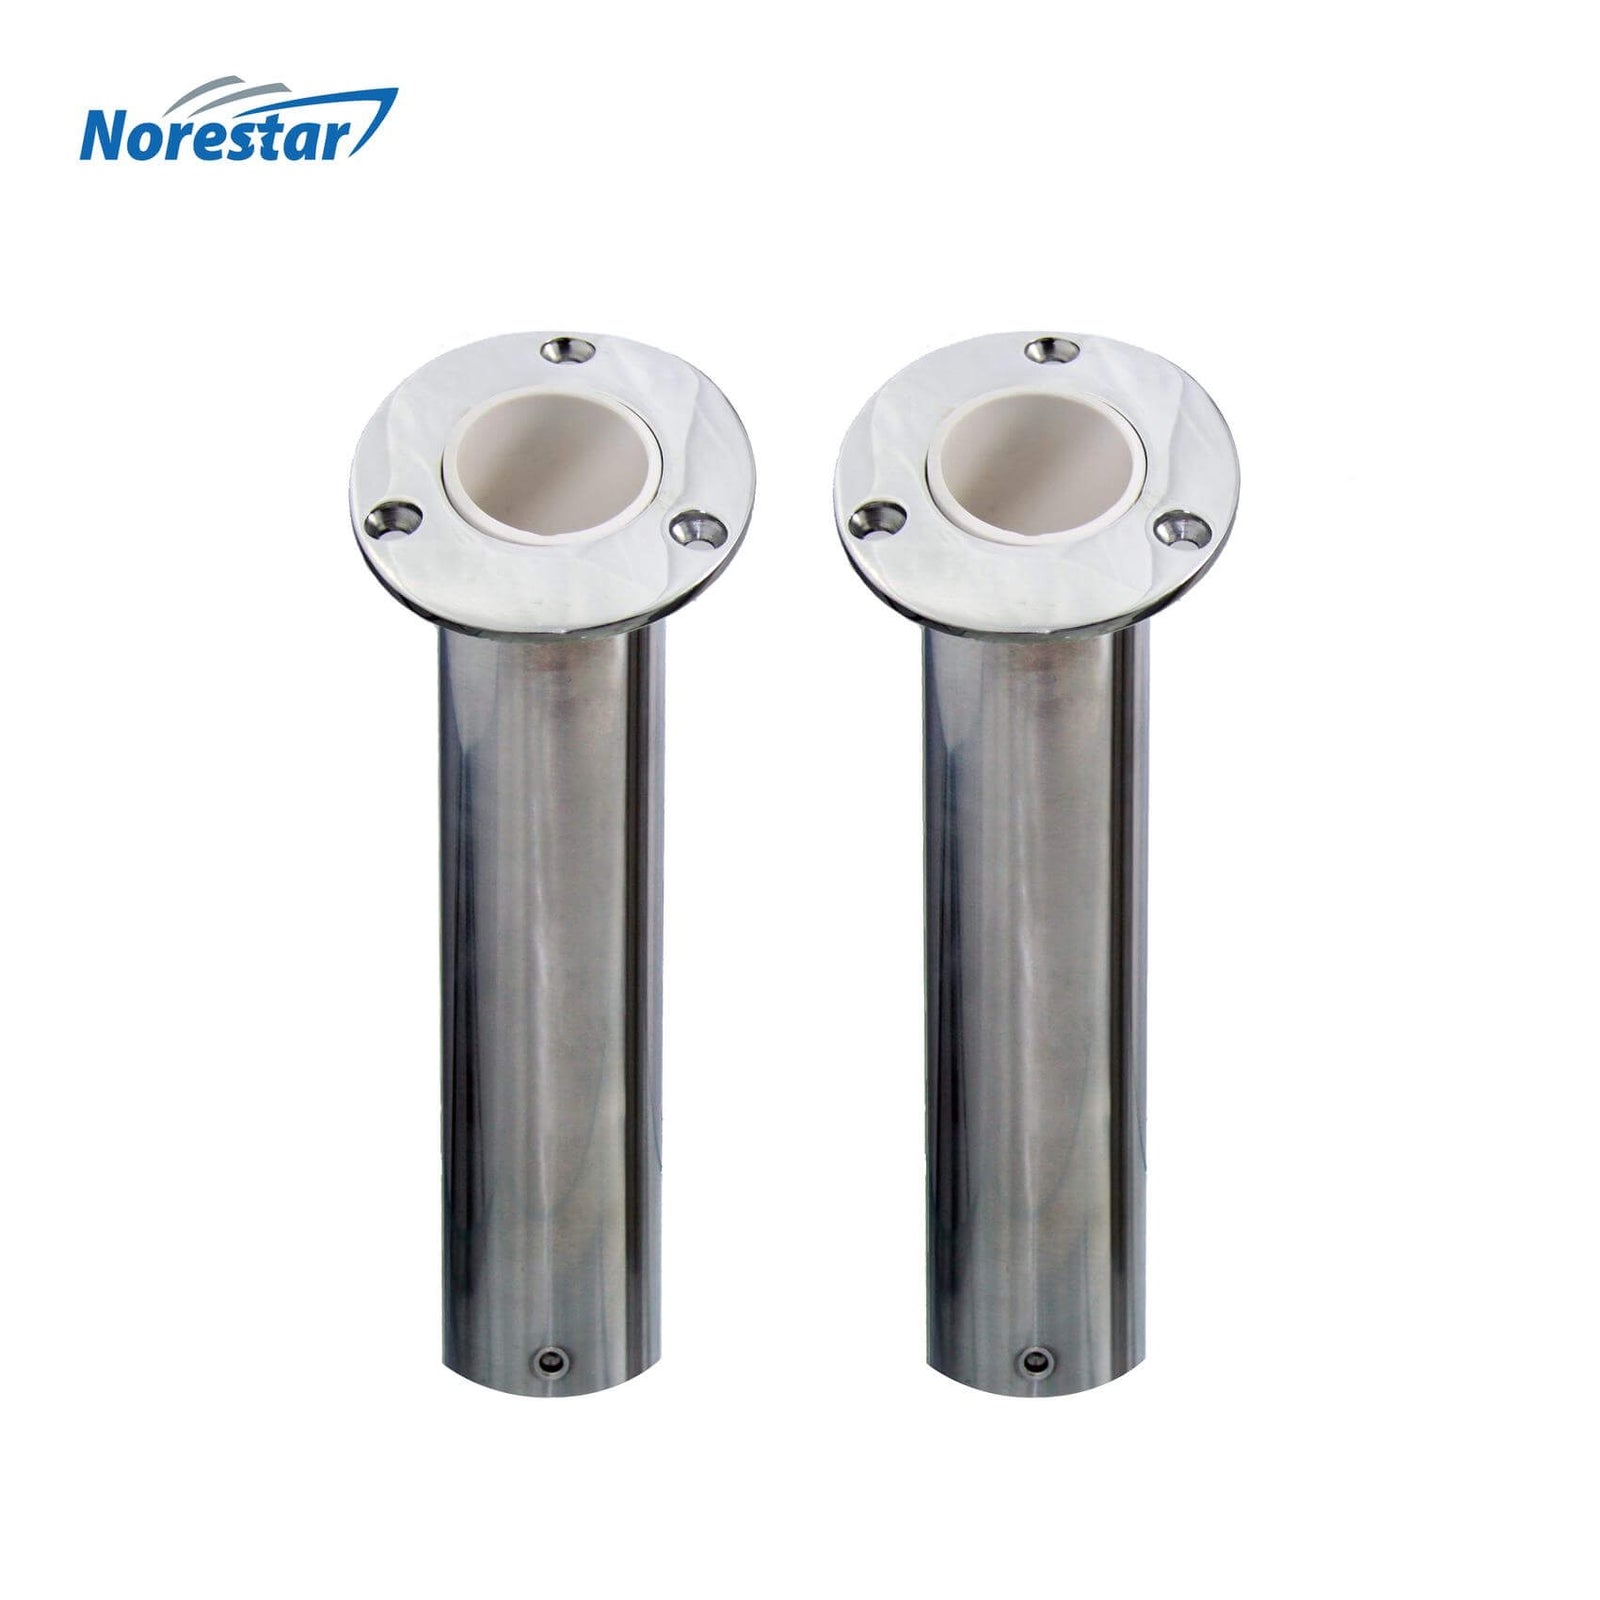 Two Flush Mounted Stainless Steel Rod Holders, Angled 30 Degrees